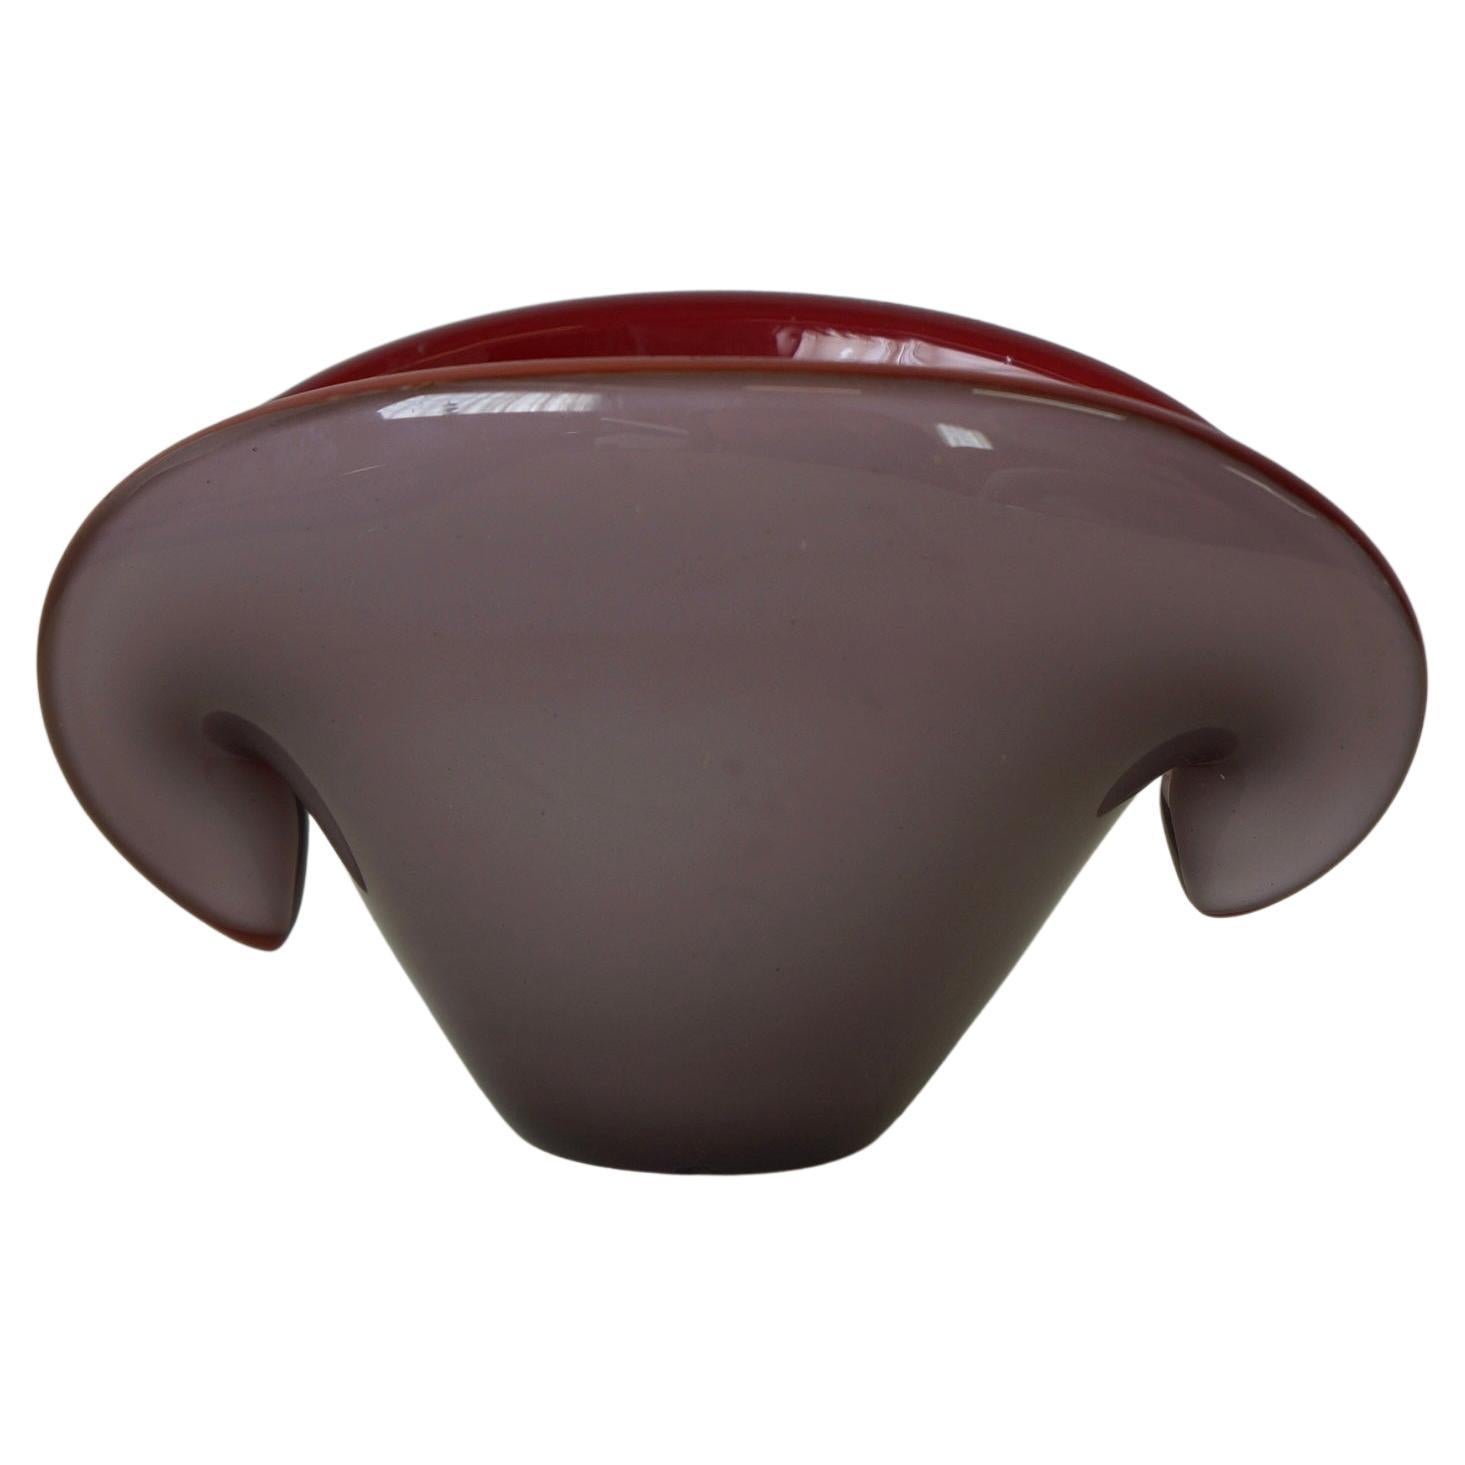 Two toned purple/grape and red Archimede Seguso clam shaped decorative bowl made by Murano. This striking decorative art glass is a well known design by Archimede Seguso made in the 1960s in Murano, Italy. The outside is a dull purple tone while the